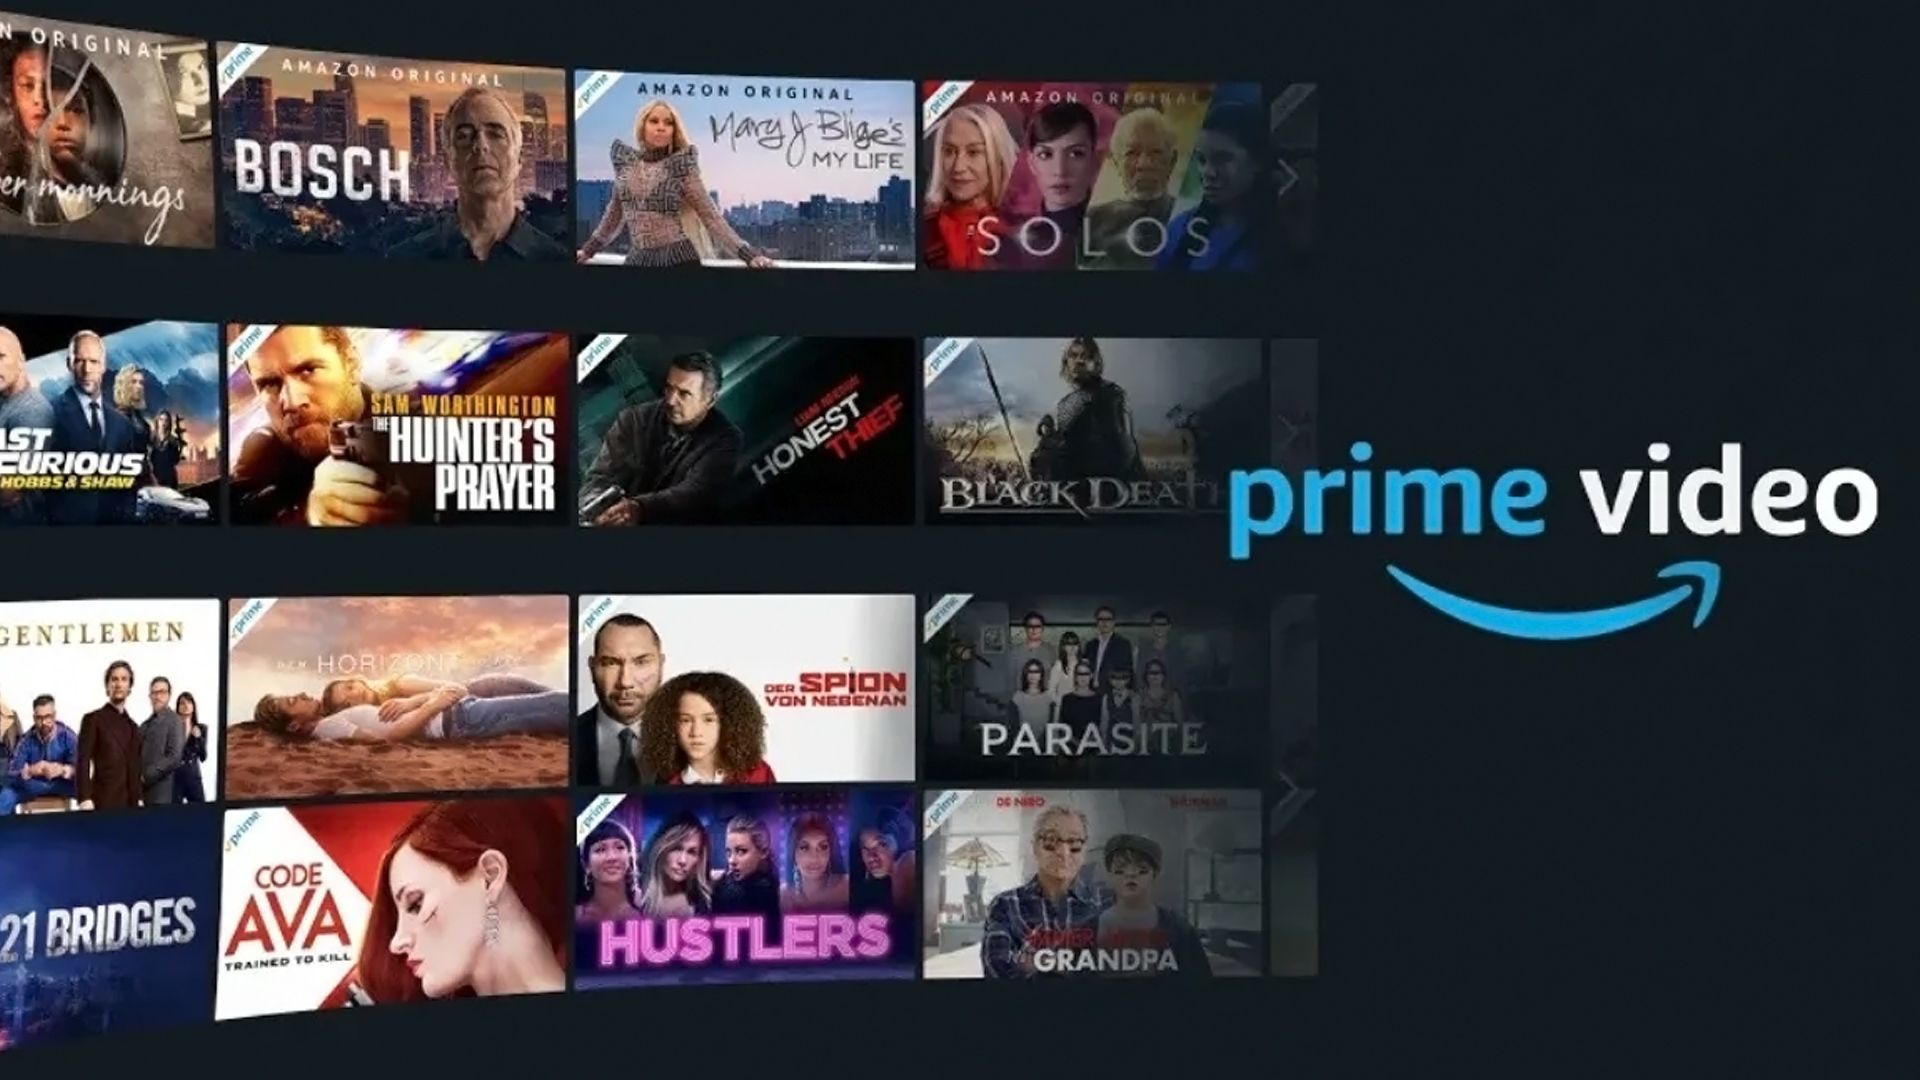 A carousel of Prime Video titles.